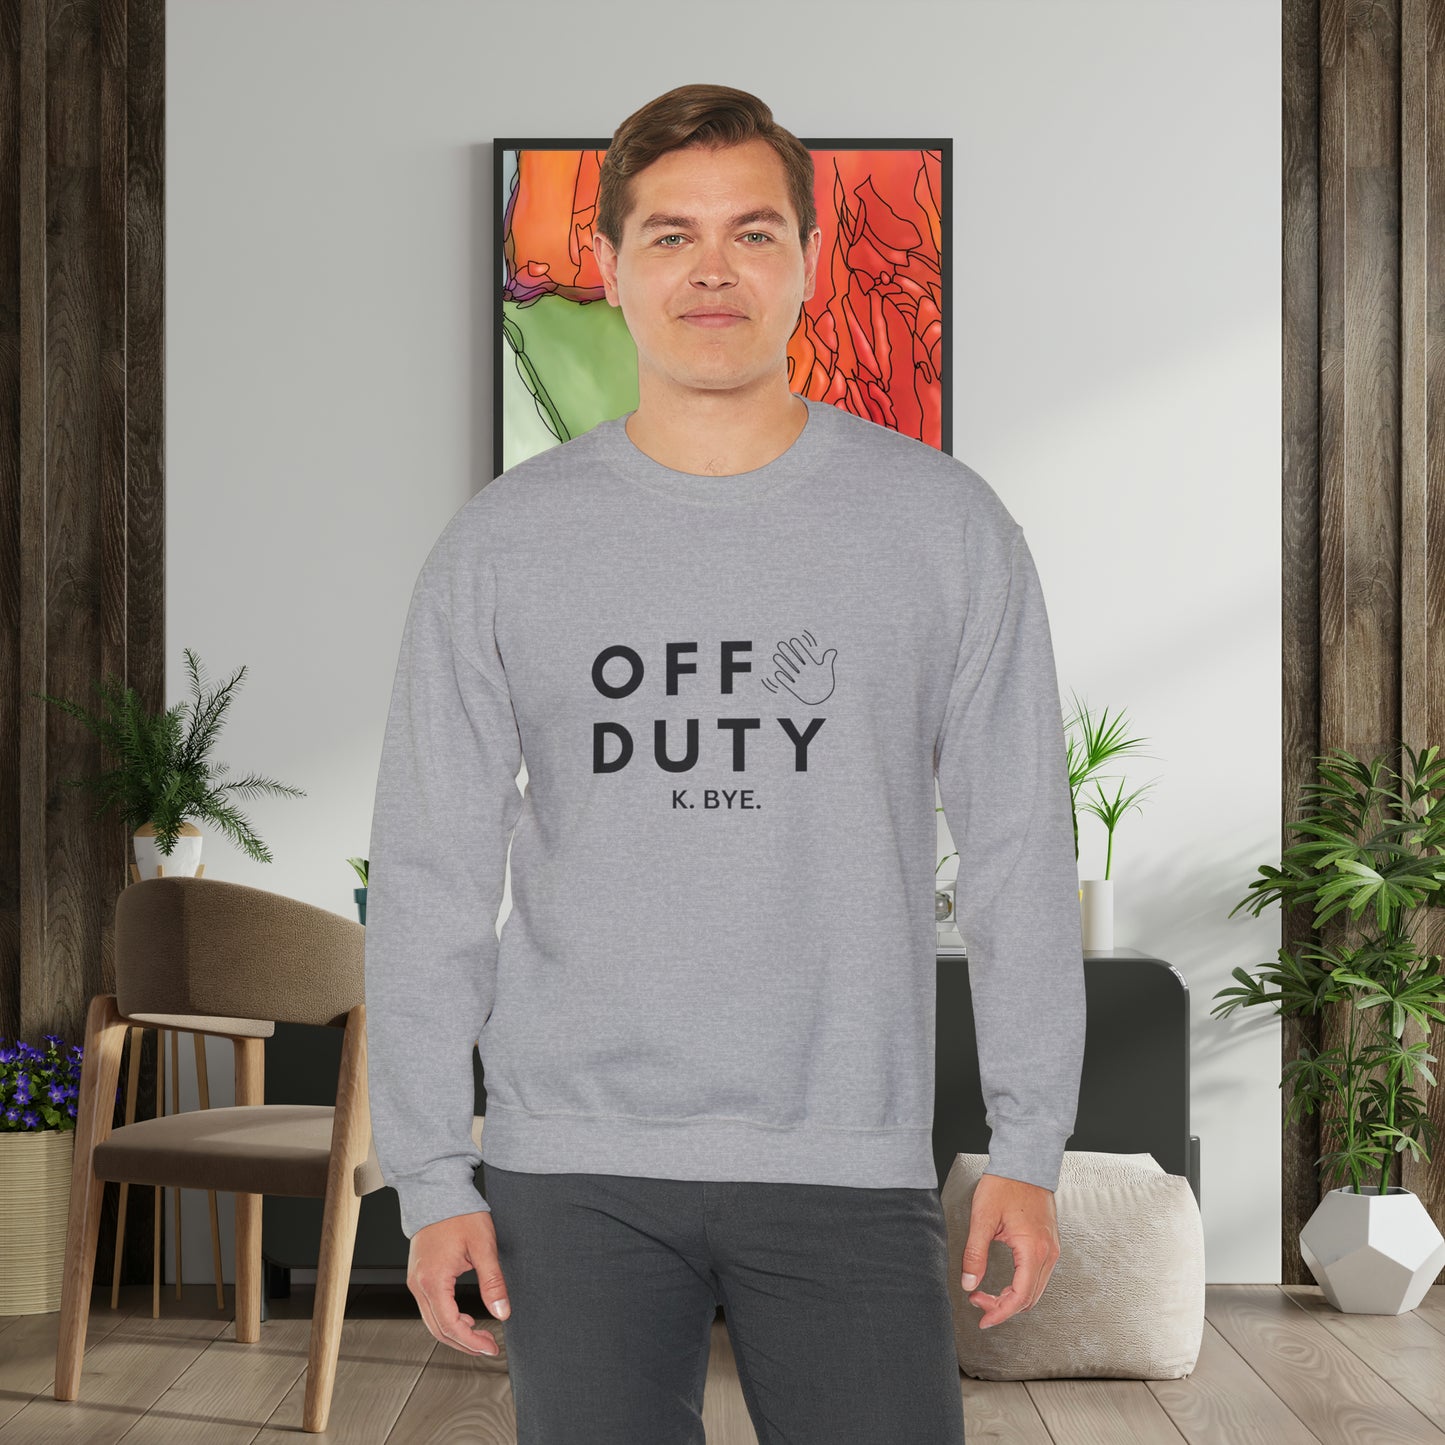 Cozy up with this simple “OFF DUTY” sweatshirt designed by Nurse Angela (my niece). Give the gift of this Unisex Heavy Blend™ Crewneck Sweatshirt or get one for yourself.